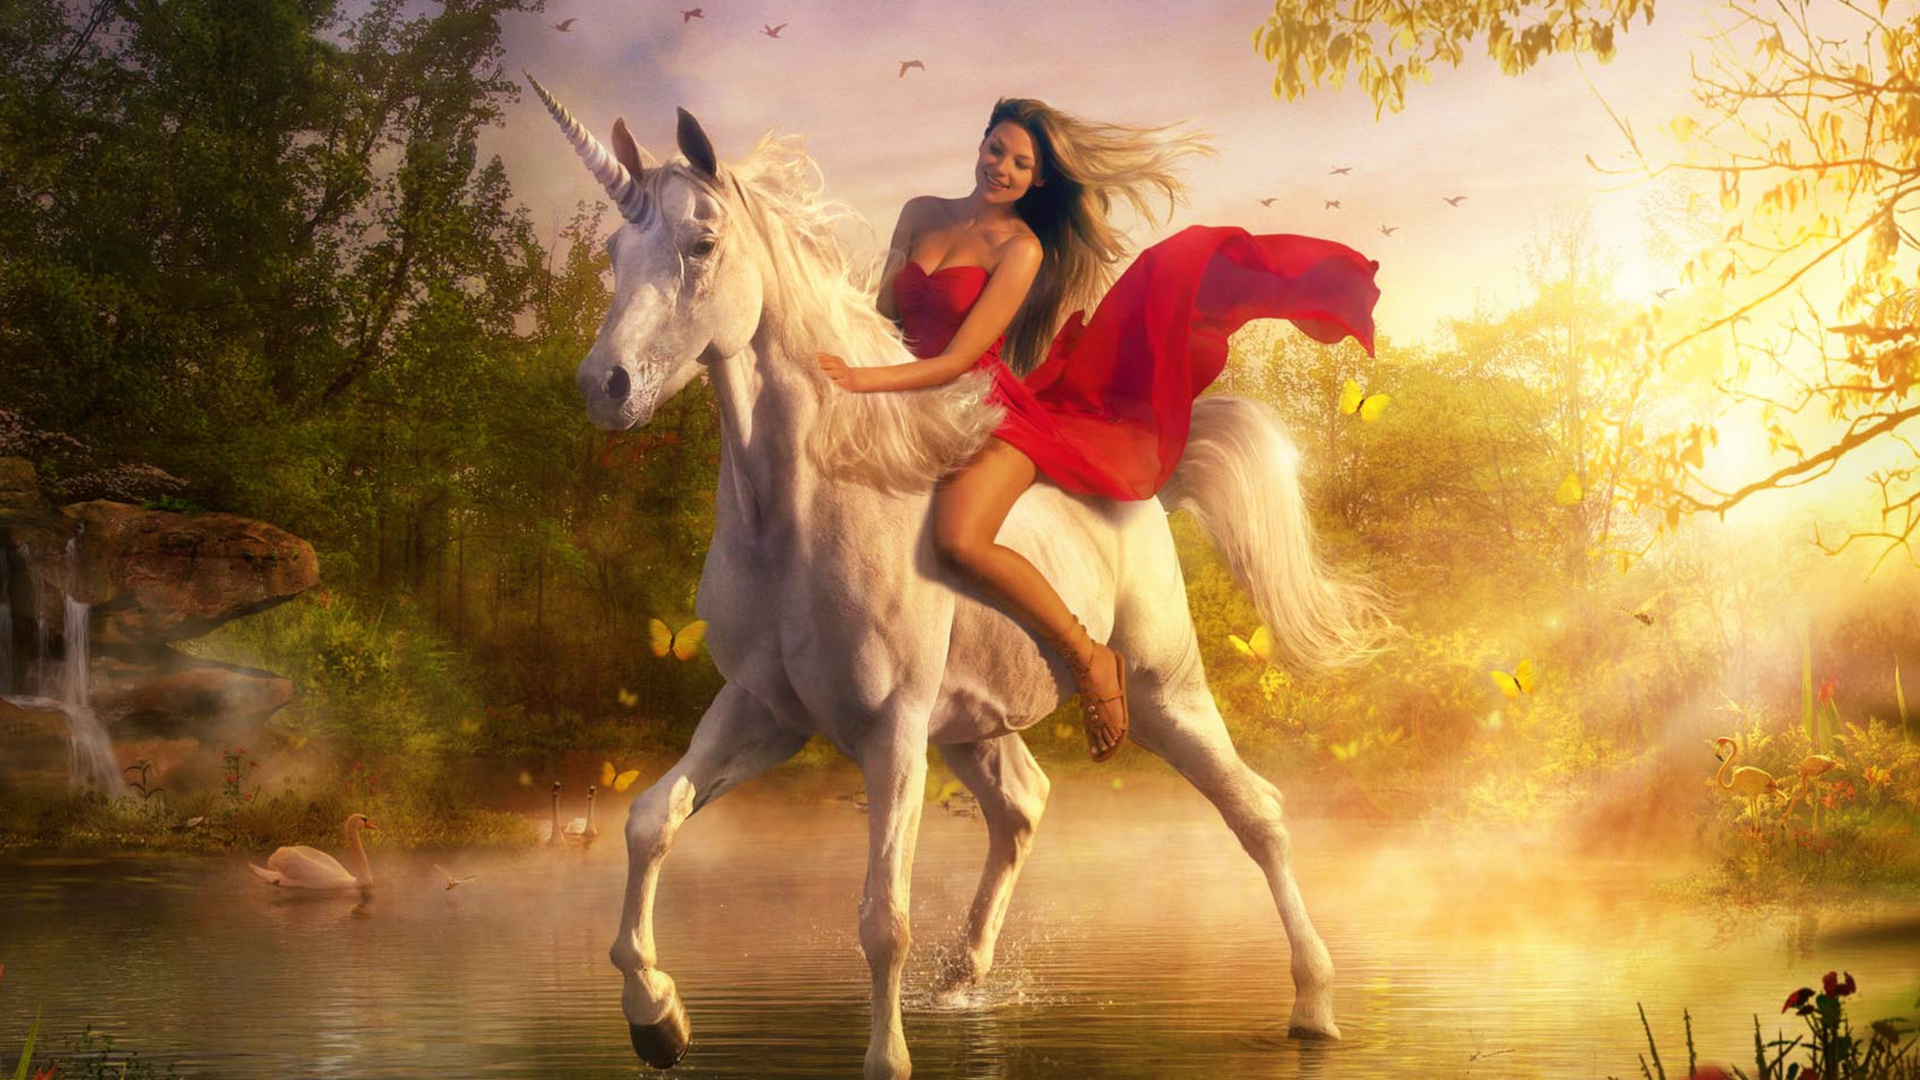 Woman in Red Dress Riding White Horse on Water. Wallpaper in 1920x1080 Resolution